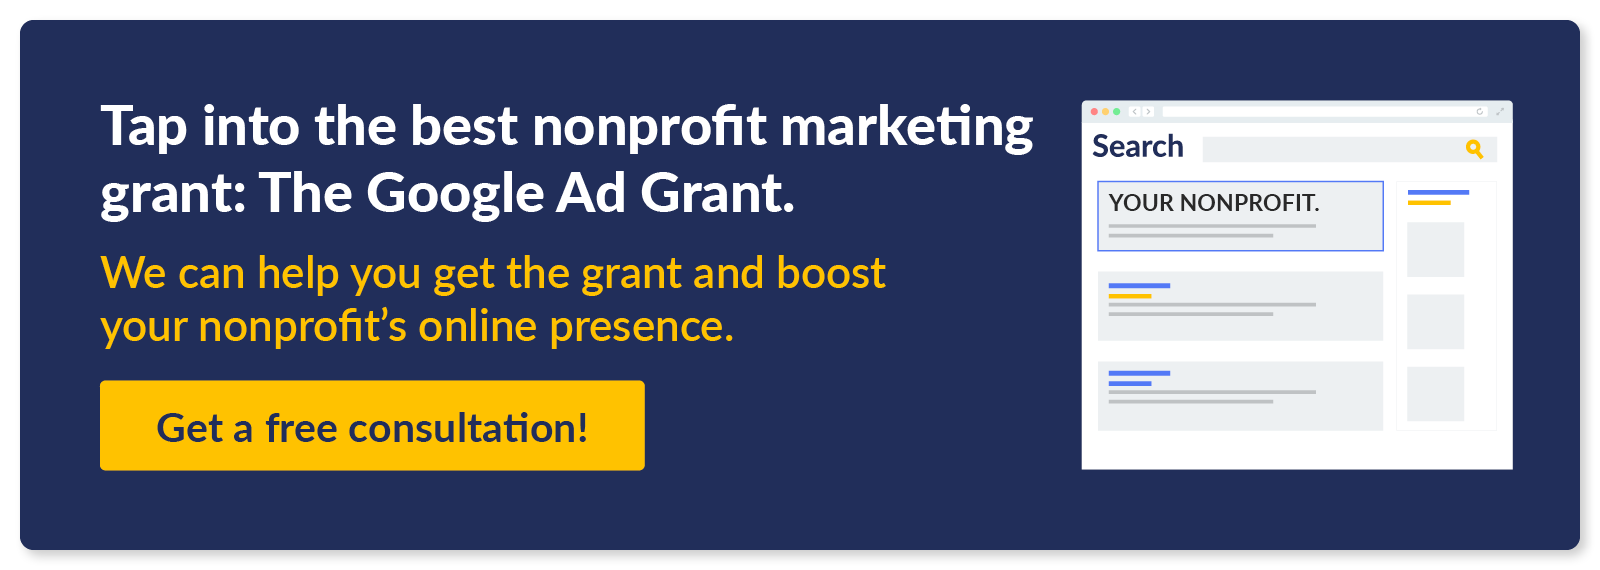 Tap into the best nonprofit marketing grant: The Google Ad Grant. We can help you get the grant and boost your nonprofit's online presence. Get a free consultation!